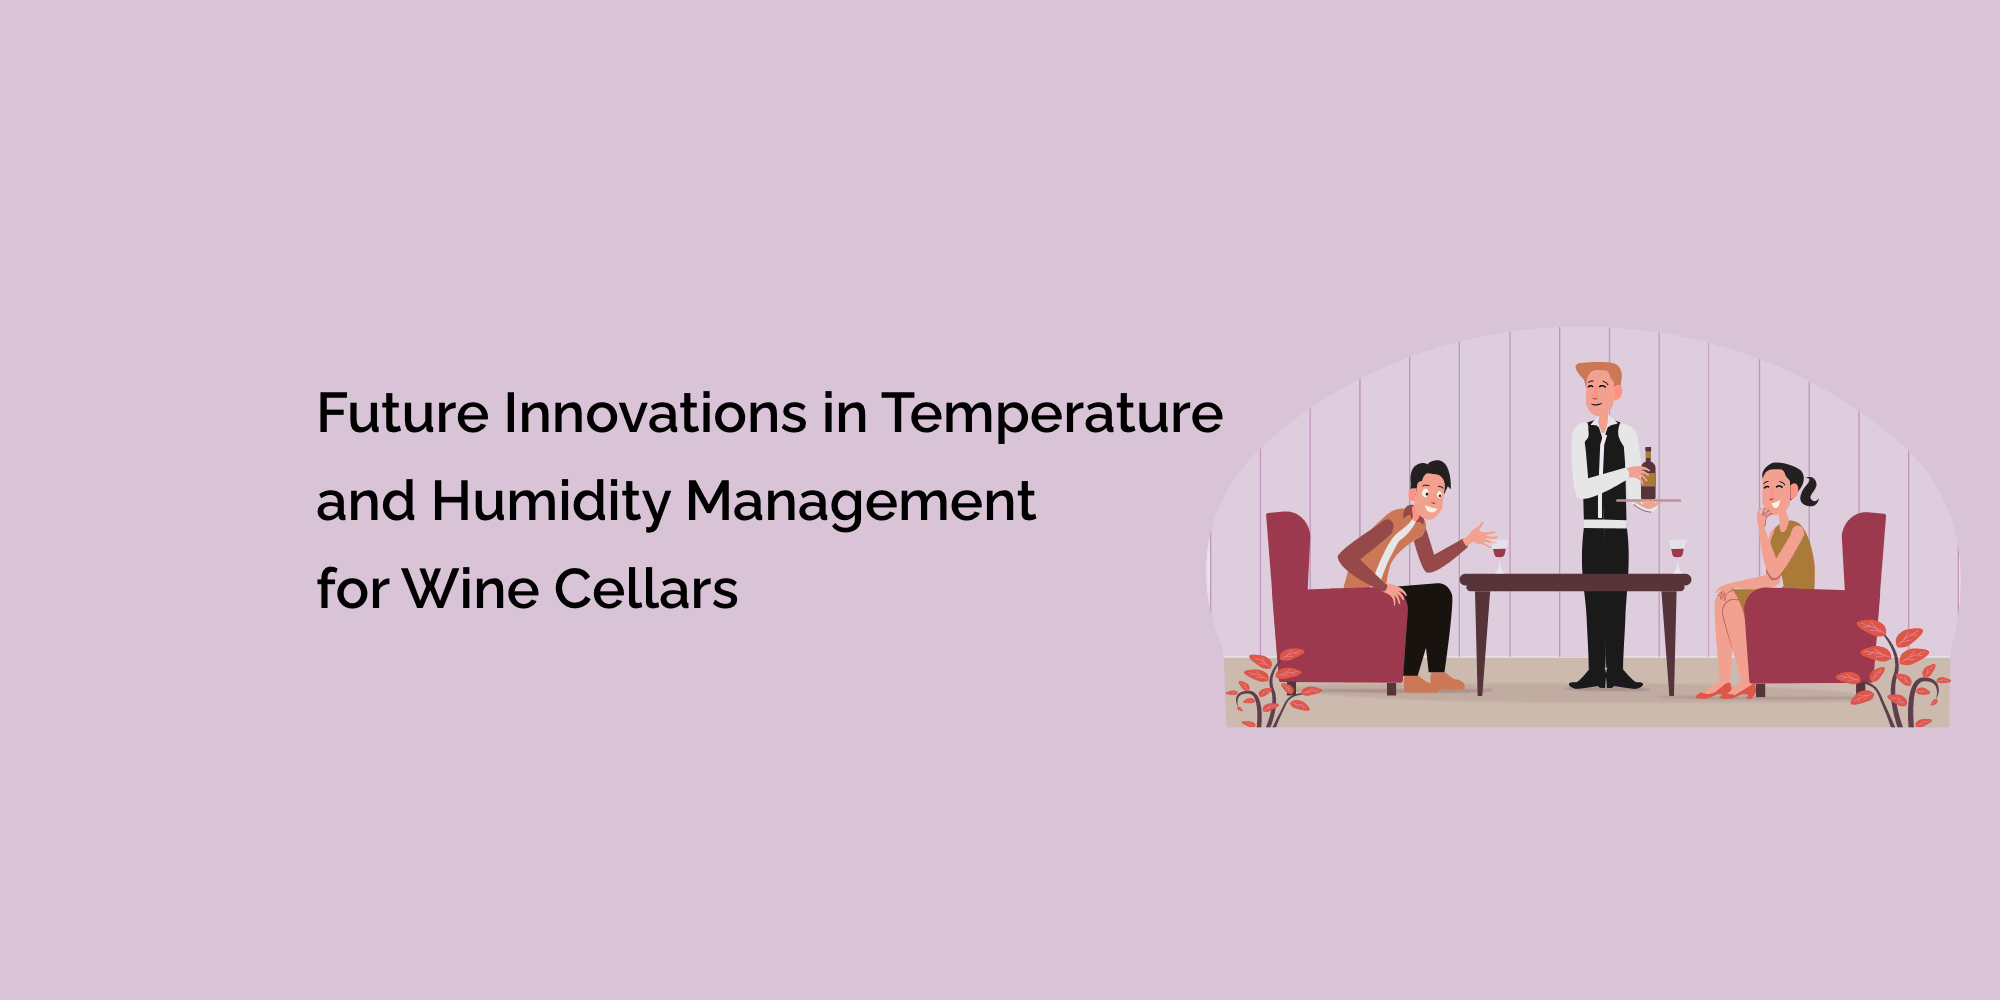 Future Innovations in Temperature and Humidity Management for Wine Cellars